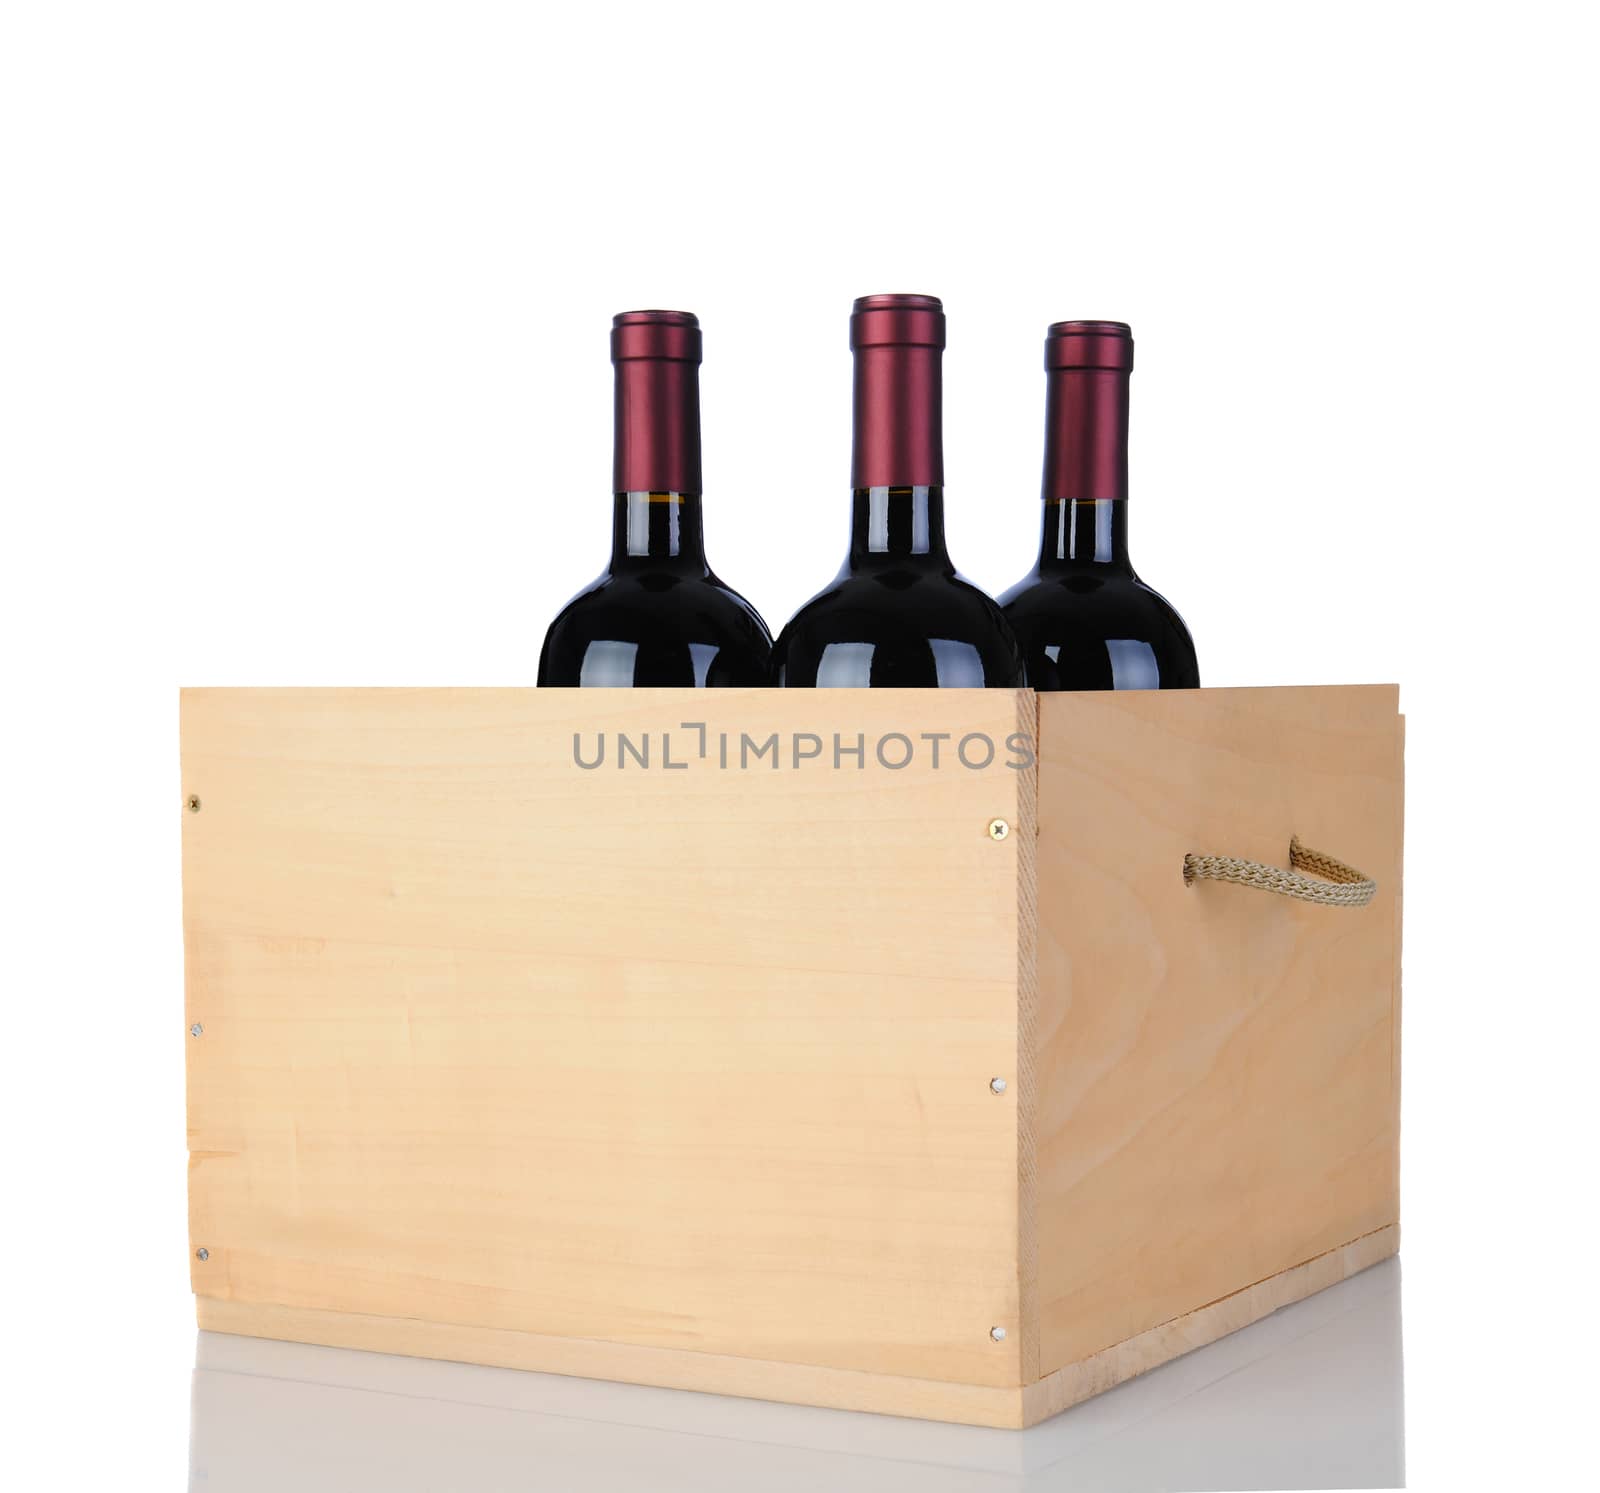 Cabernet Wine Bottles in Wood Crate by sCukrov